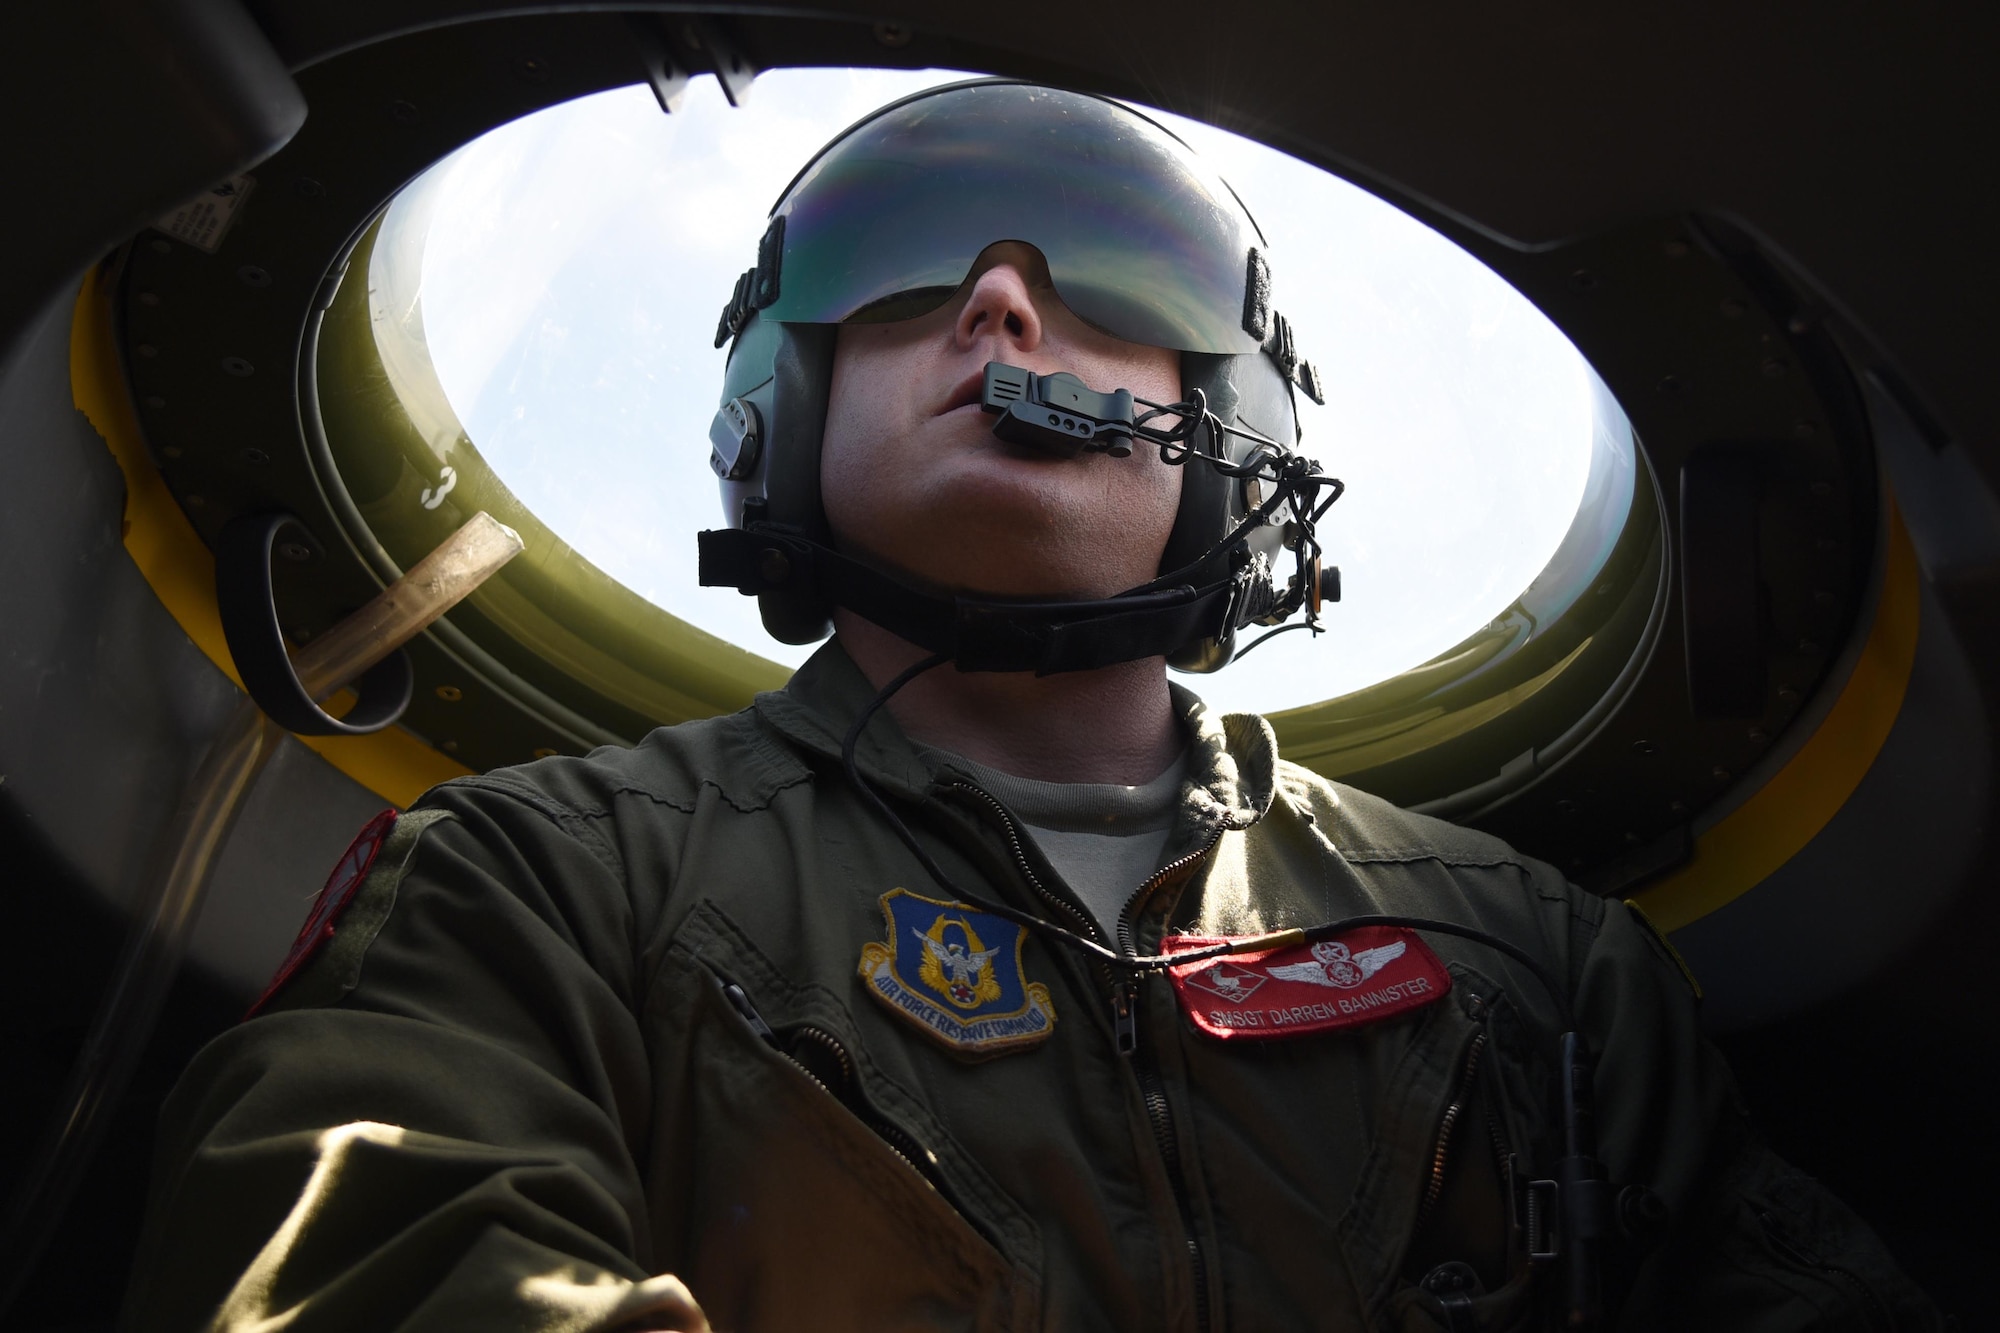 Senior Master Sgt. Darren Bannister, loadmaster with the 815th Airlift Squadron looks out of the bubble on the flight deck while taking part in a paratroop drop over Normandy, France. This event commemorates the 73rd anniversary of D-Day, the largest multi-national amphibious landing and operational military airdrop in history, and highlights the U.S.' steadfast commitment to European allies and partners. Overall, approximately 400 U.S. service members from units in Europe and the U.S. are participating in ceremonial D-Day events from May 31 to June 7, 2017(U.S. Air Force photo by Staff Sgt. Nicholas Monteleone)